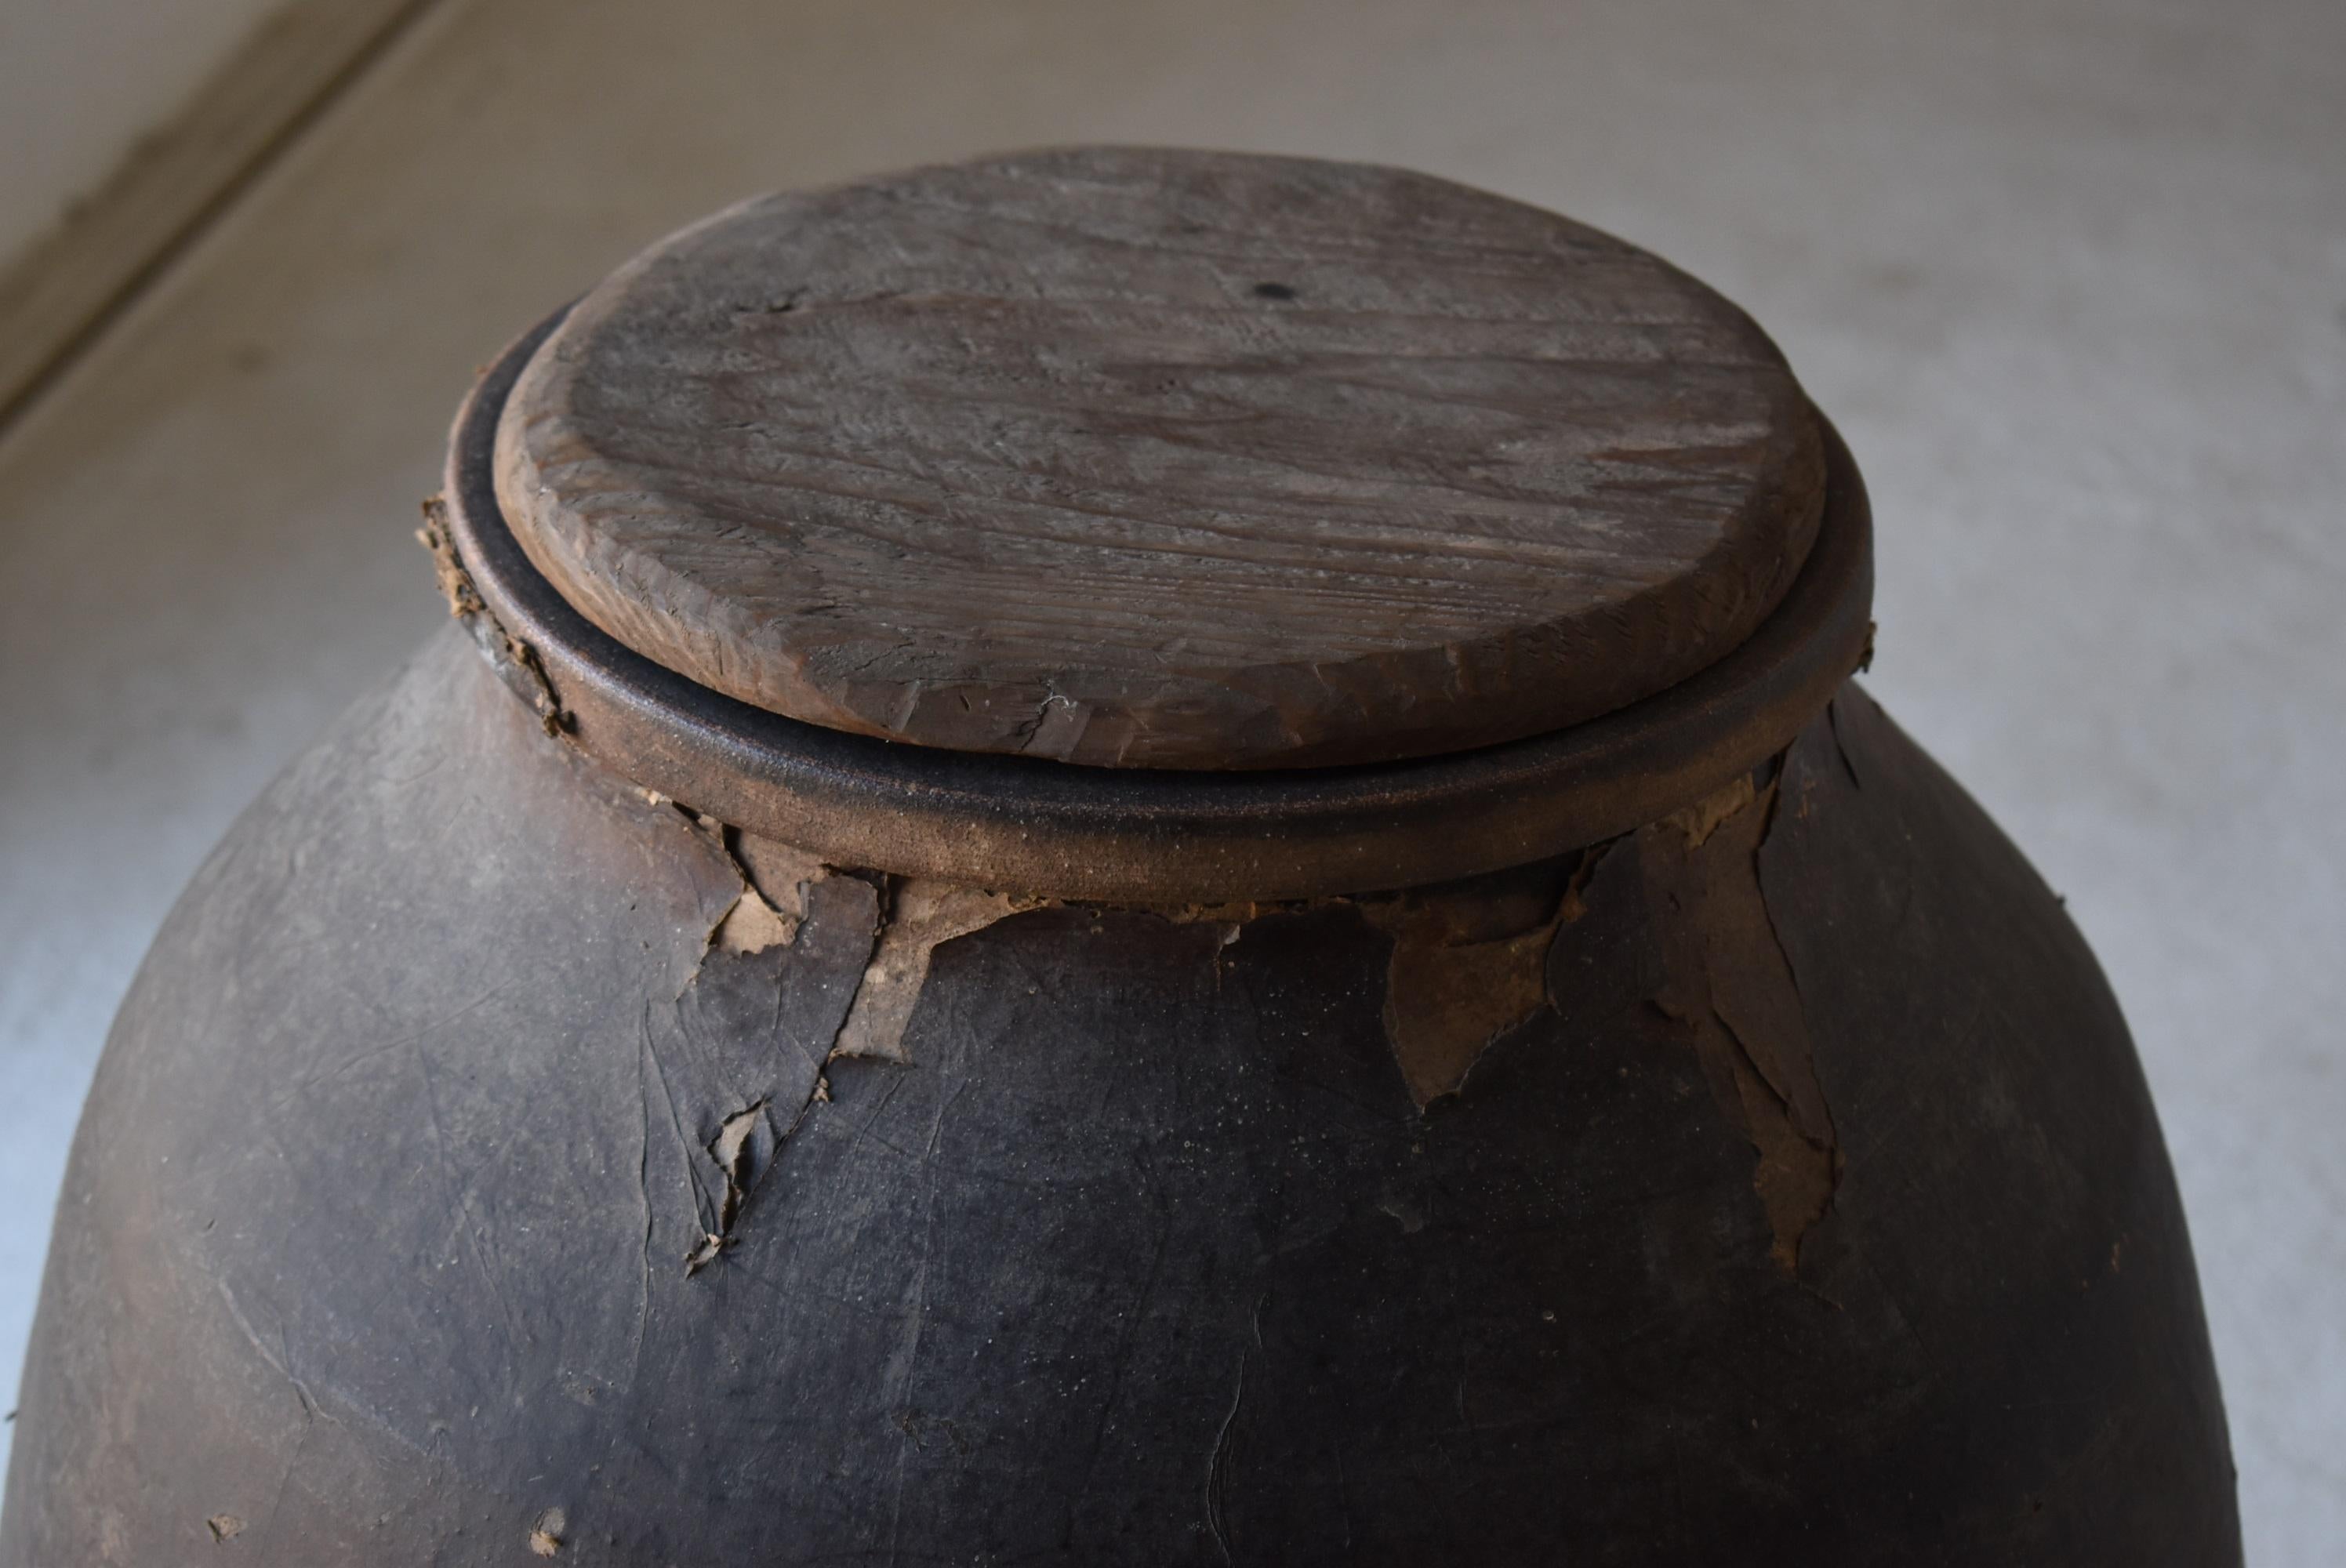 It is a jar baked in Shigaraki (Shiga Prefecture) in Japan.
It seems to be from the Edo period to the Meiji period (1800s to 1900s).
A set of wooden lids.

It is used to store tea leaves.
The pottery is covered with paper.
The reason is that